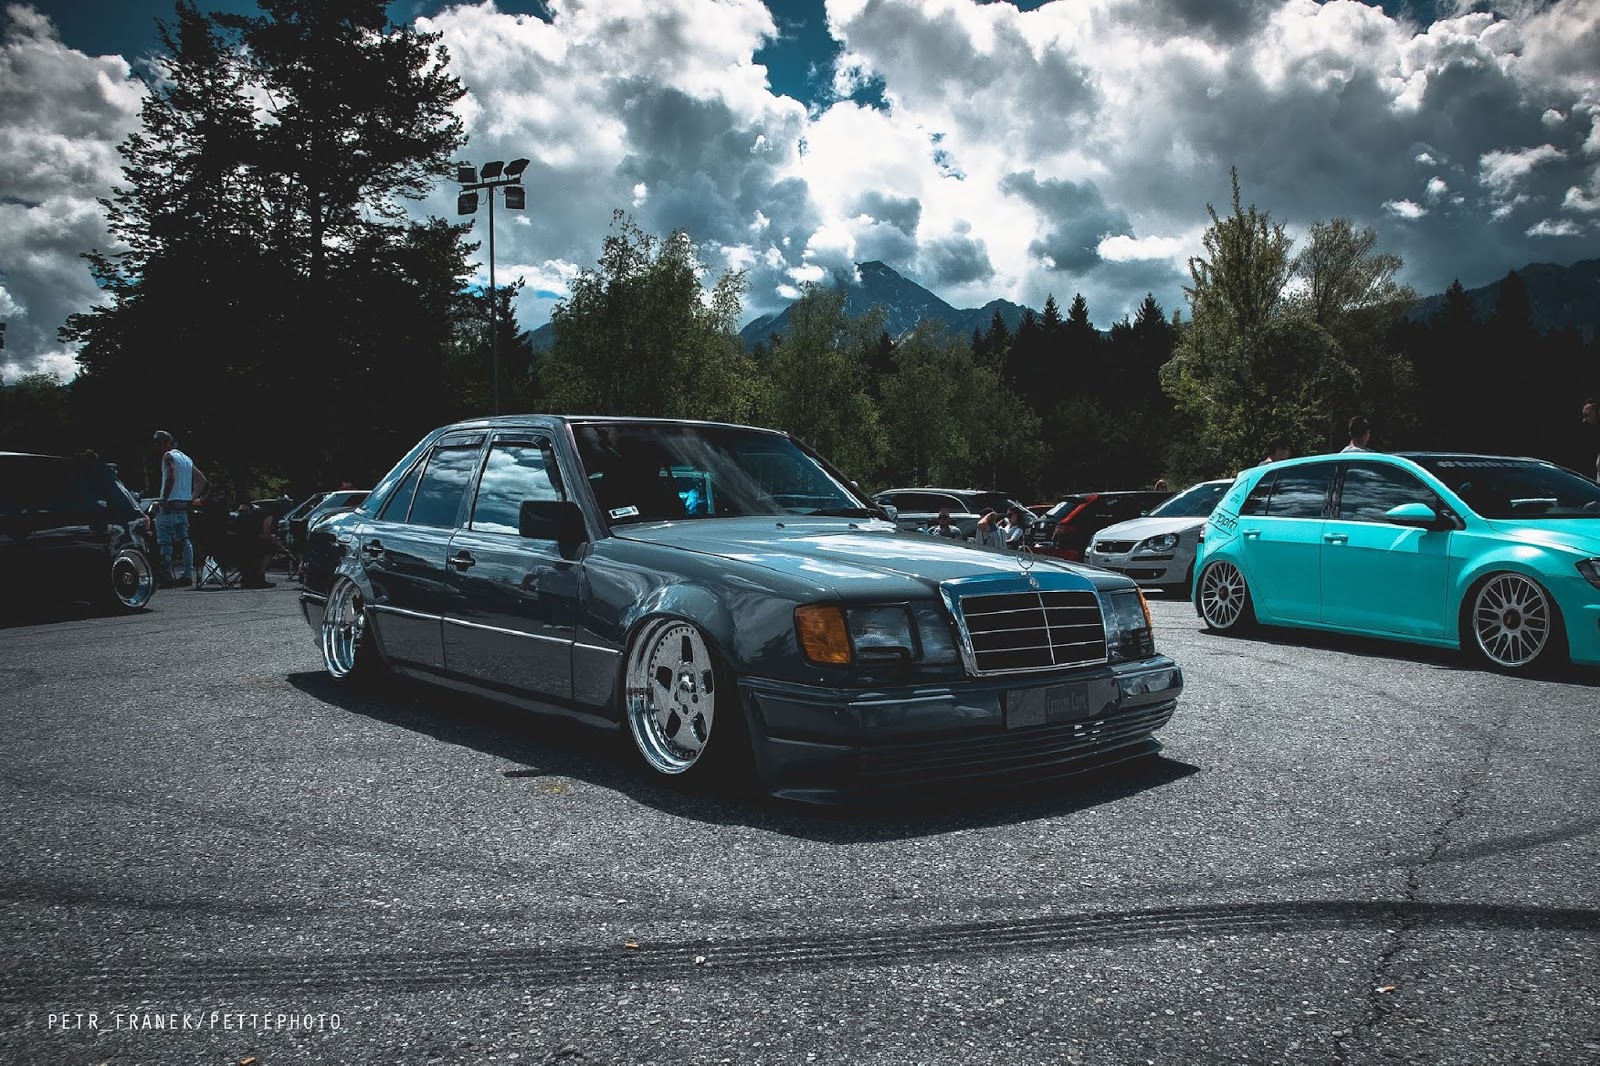 Tuning Mercedes W124 Stance.